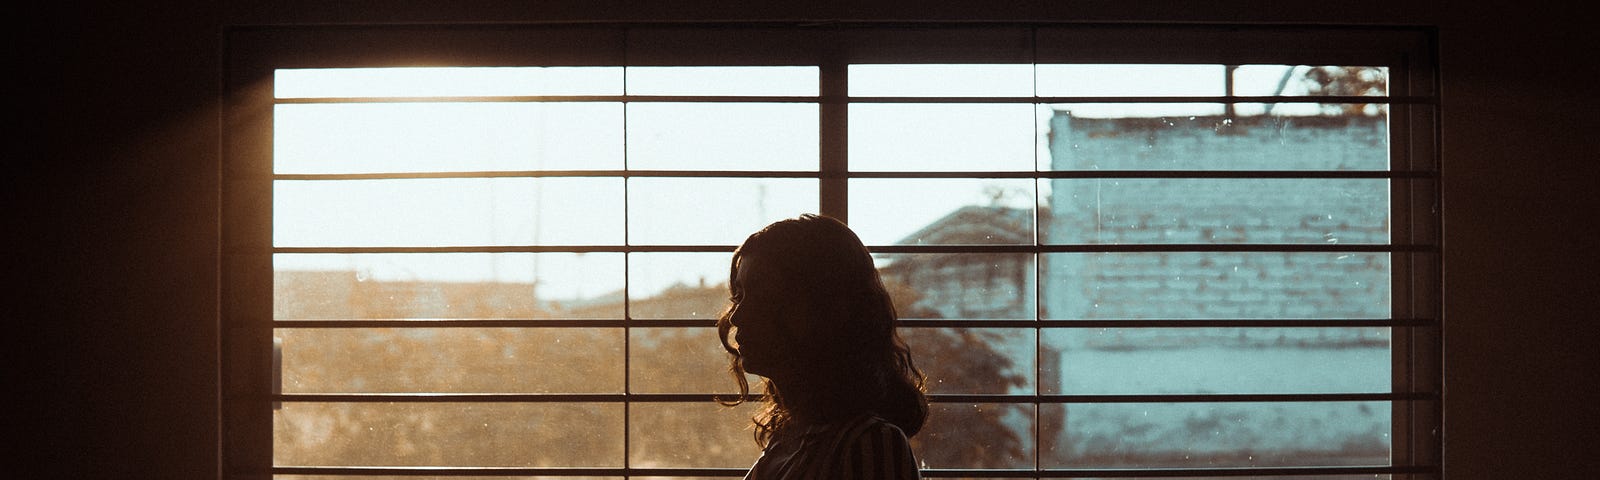 A woman looks out at buildings beyond a window, her body silhouetted against the light.